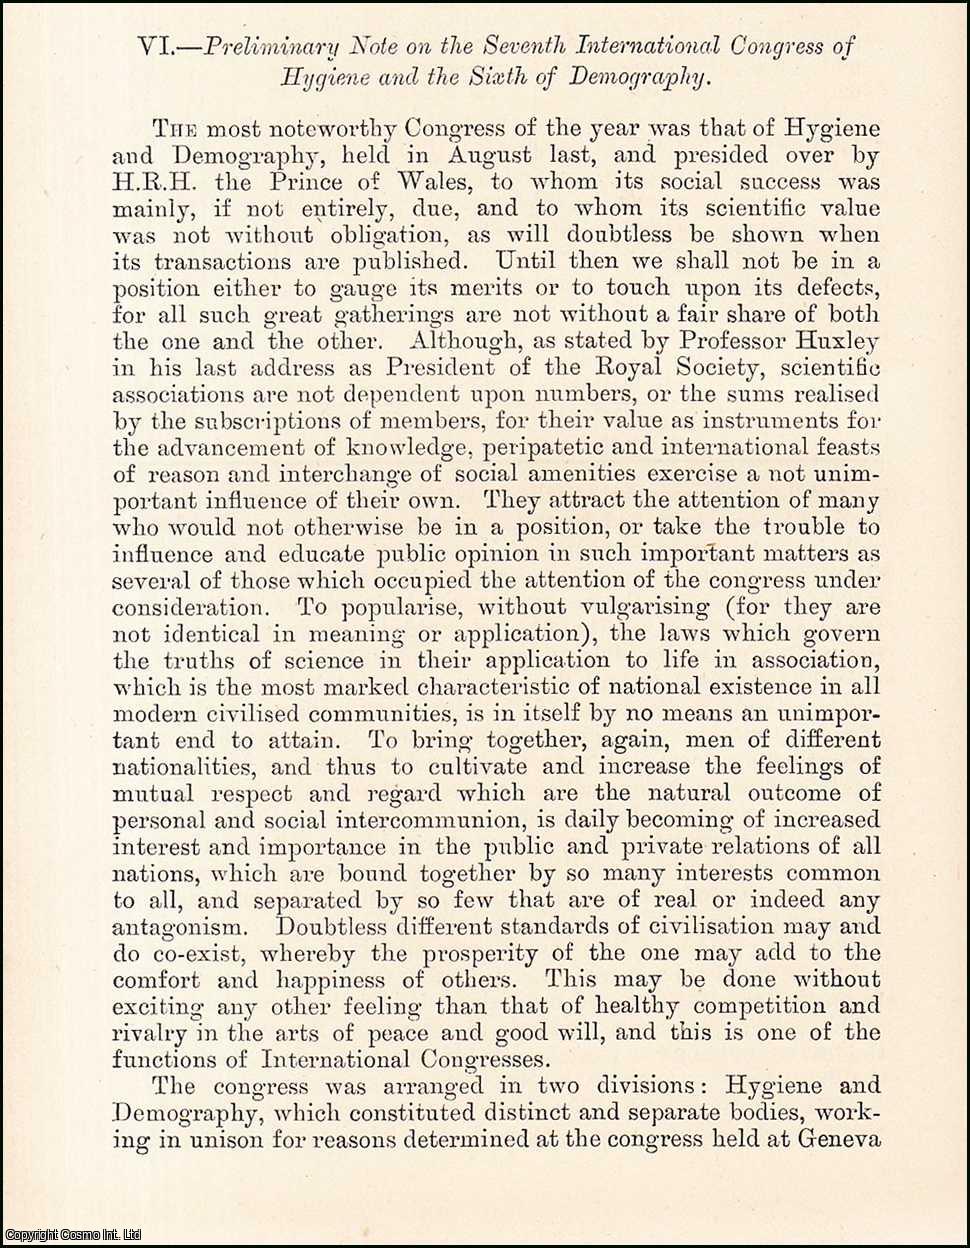 No Author Stated - Congress of Hygiene & Demography. An uncommon original article from the Journal of the Royal Statistical Society of London, 1891.